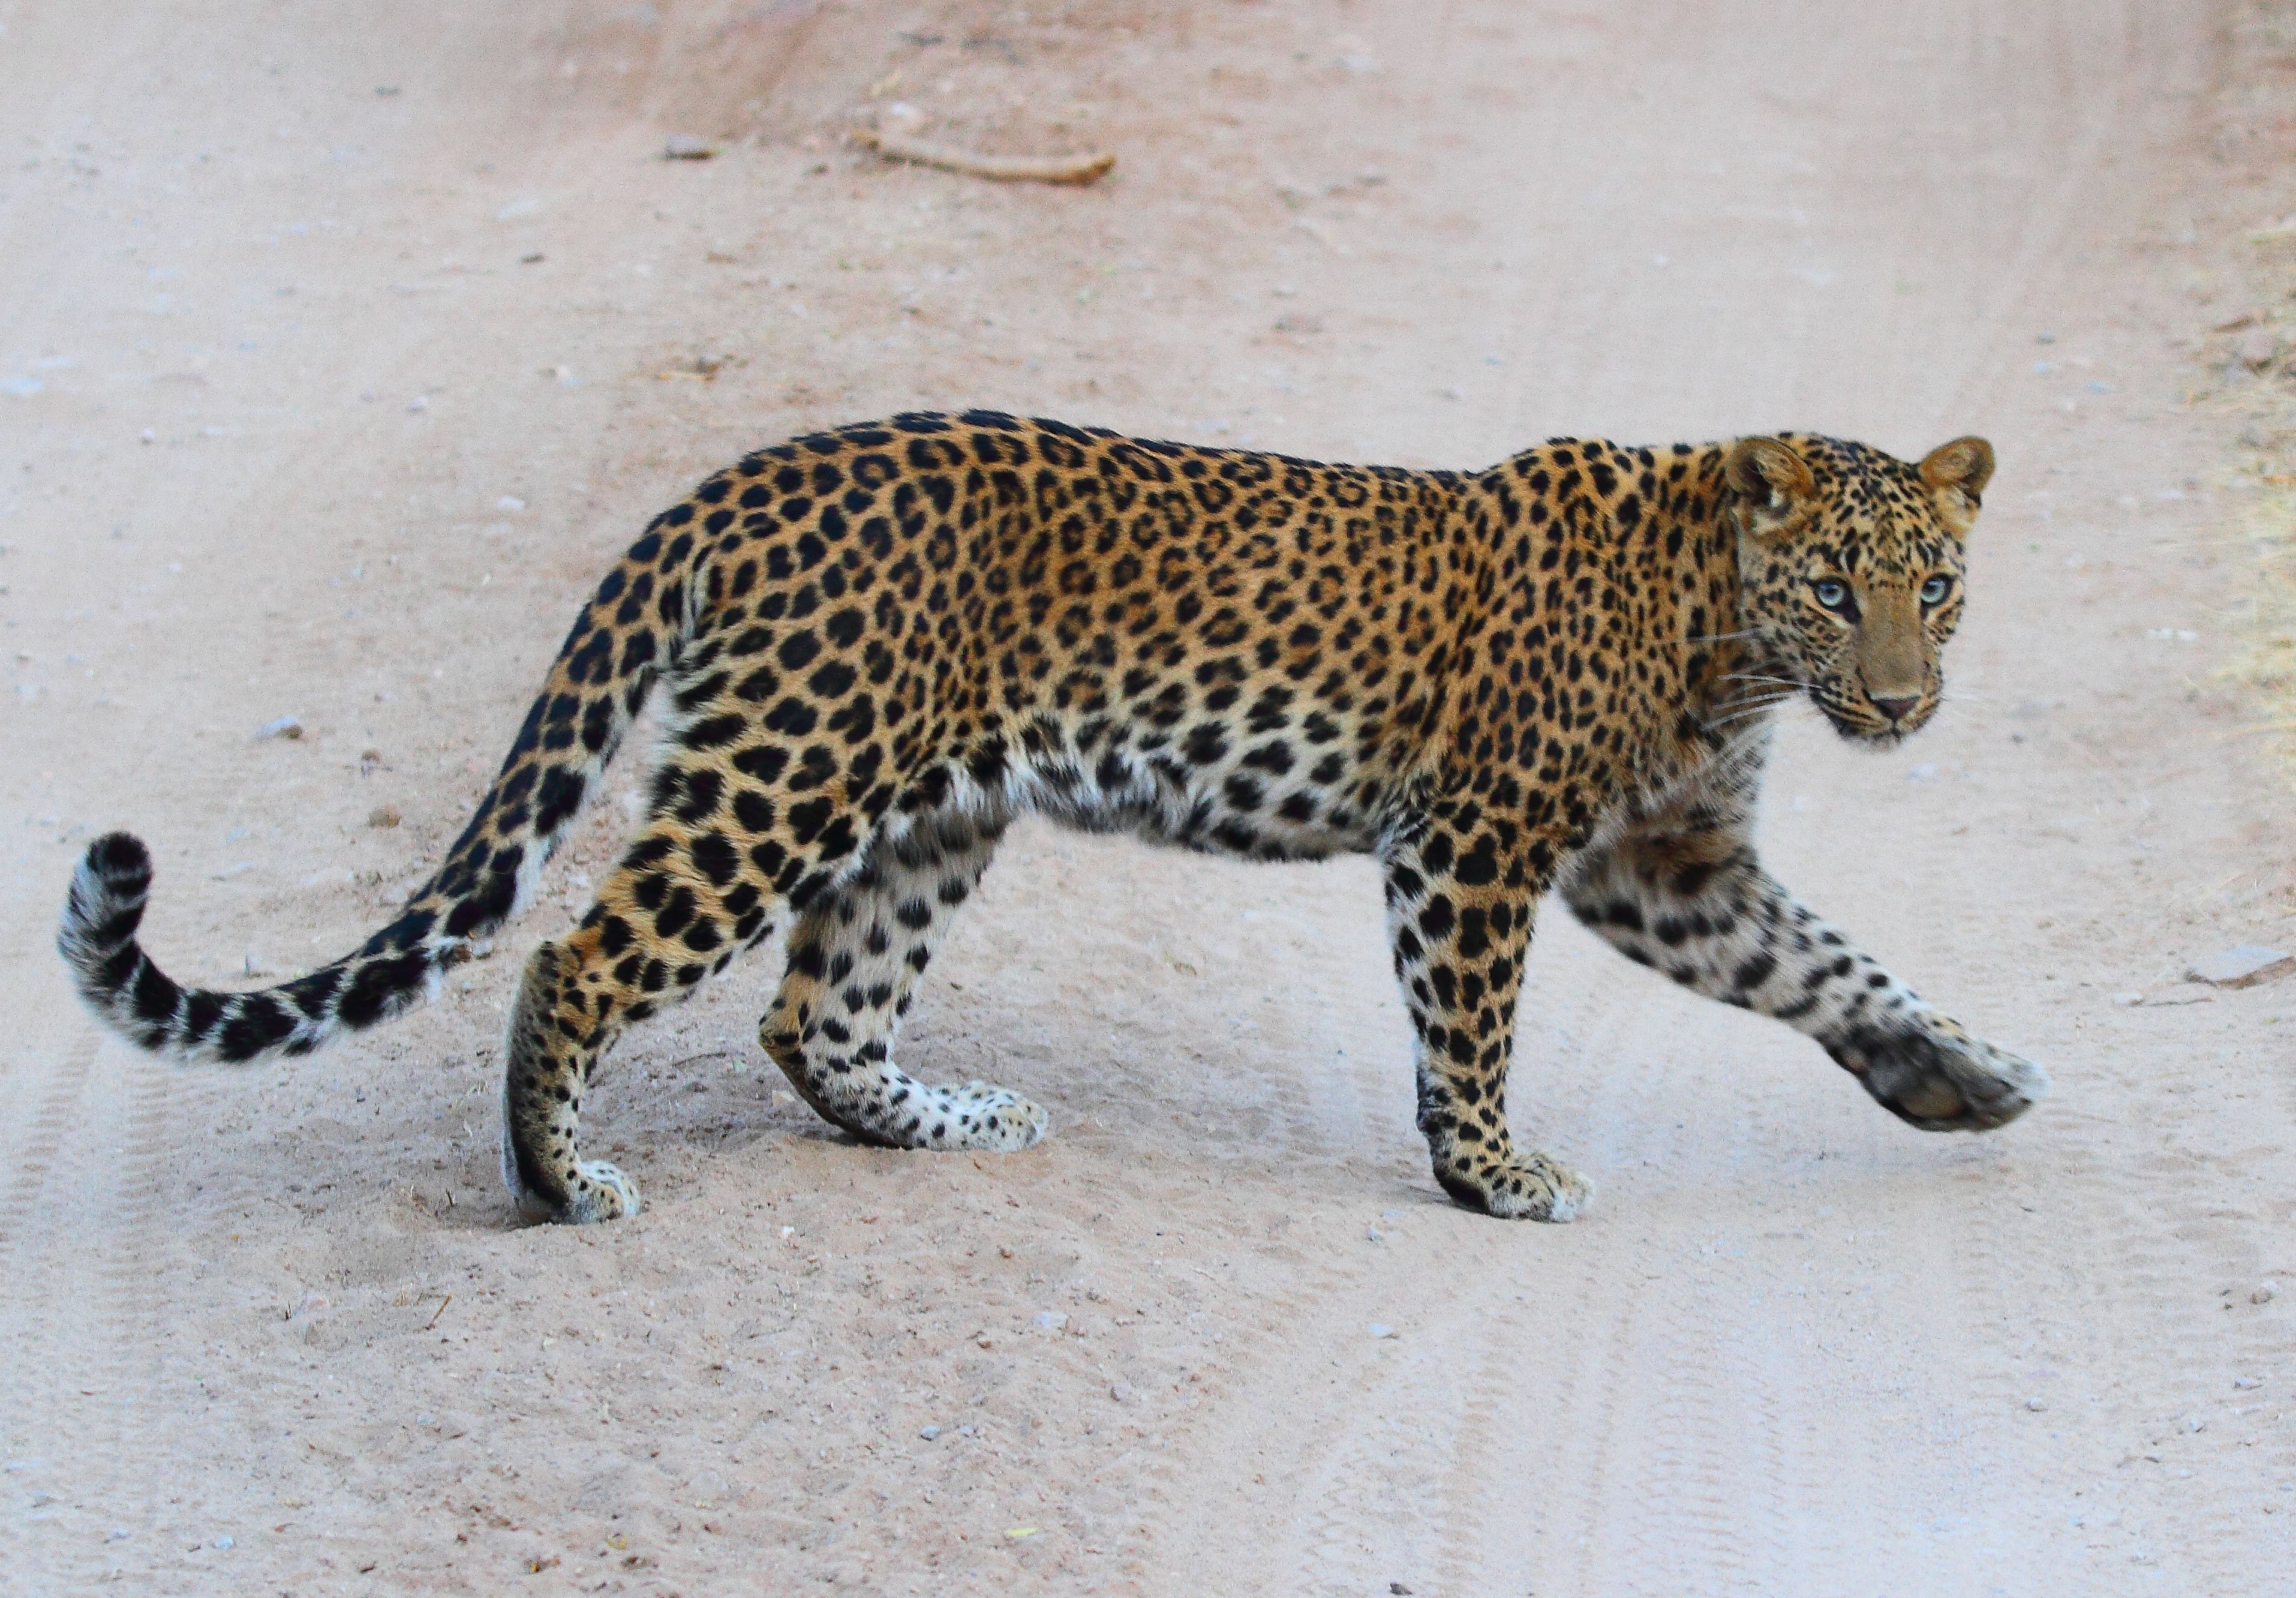 Leopard expansion and movement towards the Thar Desert of Rajasthan